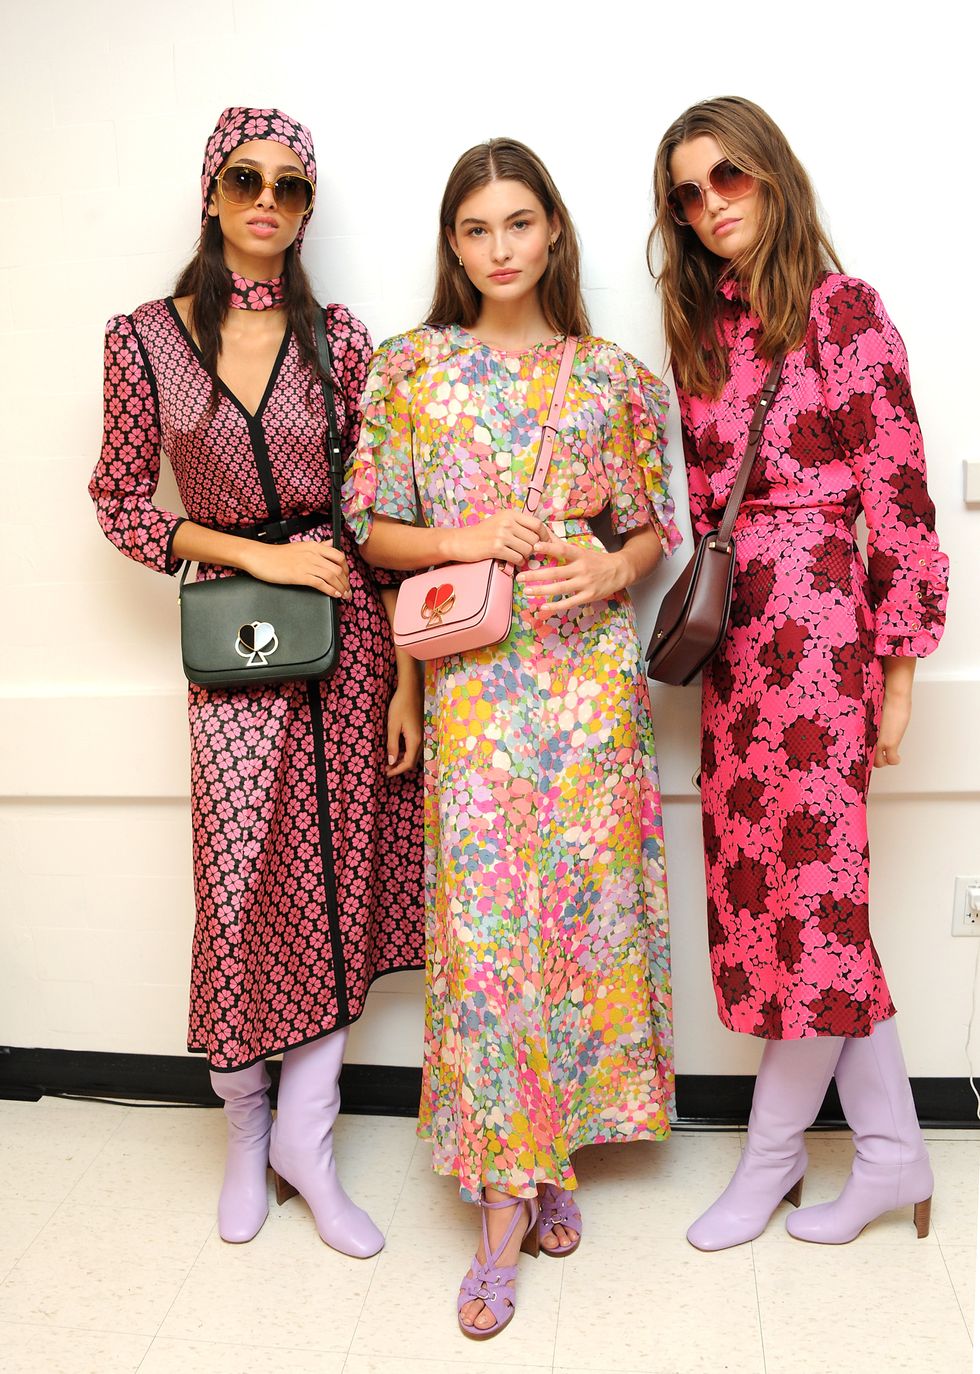 Kate Spade New York Spring 2020 Ready-to-Wear Collection